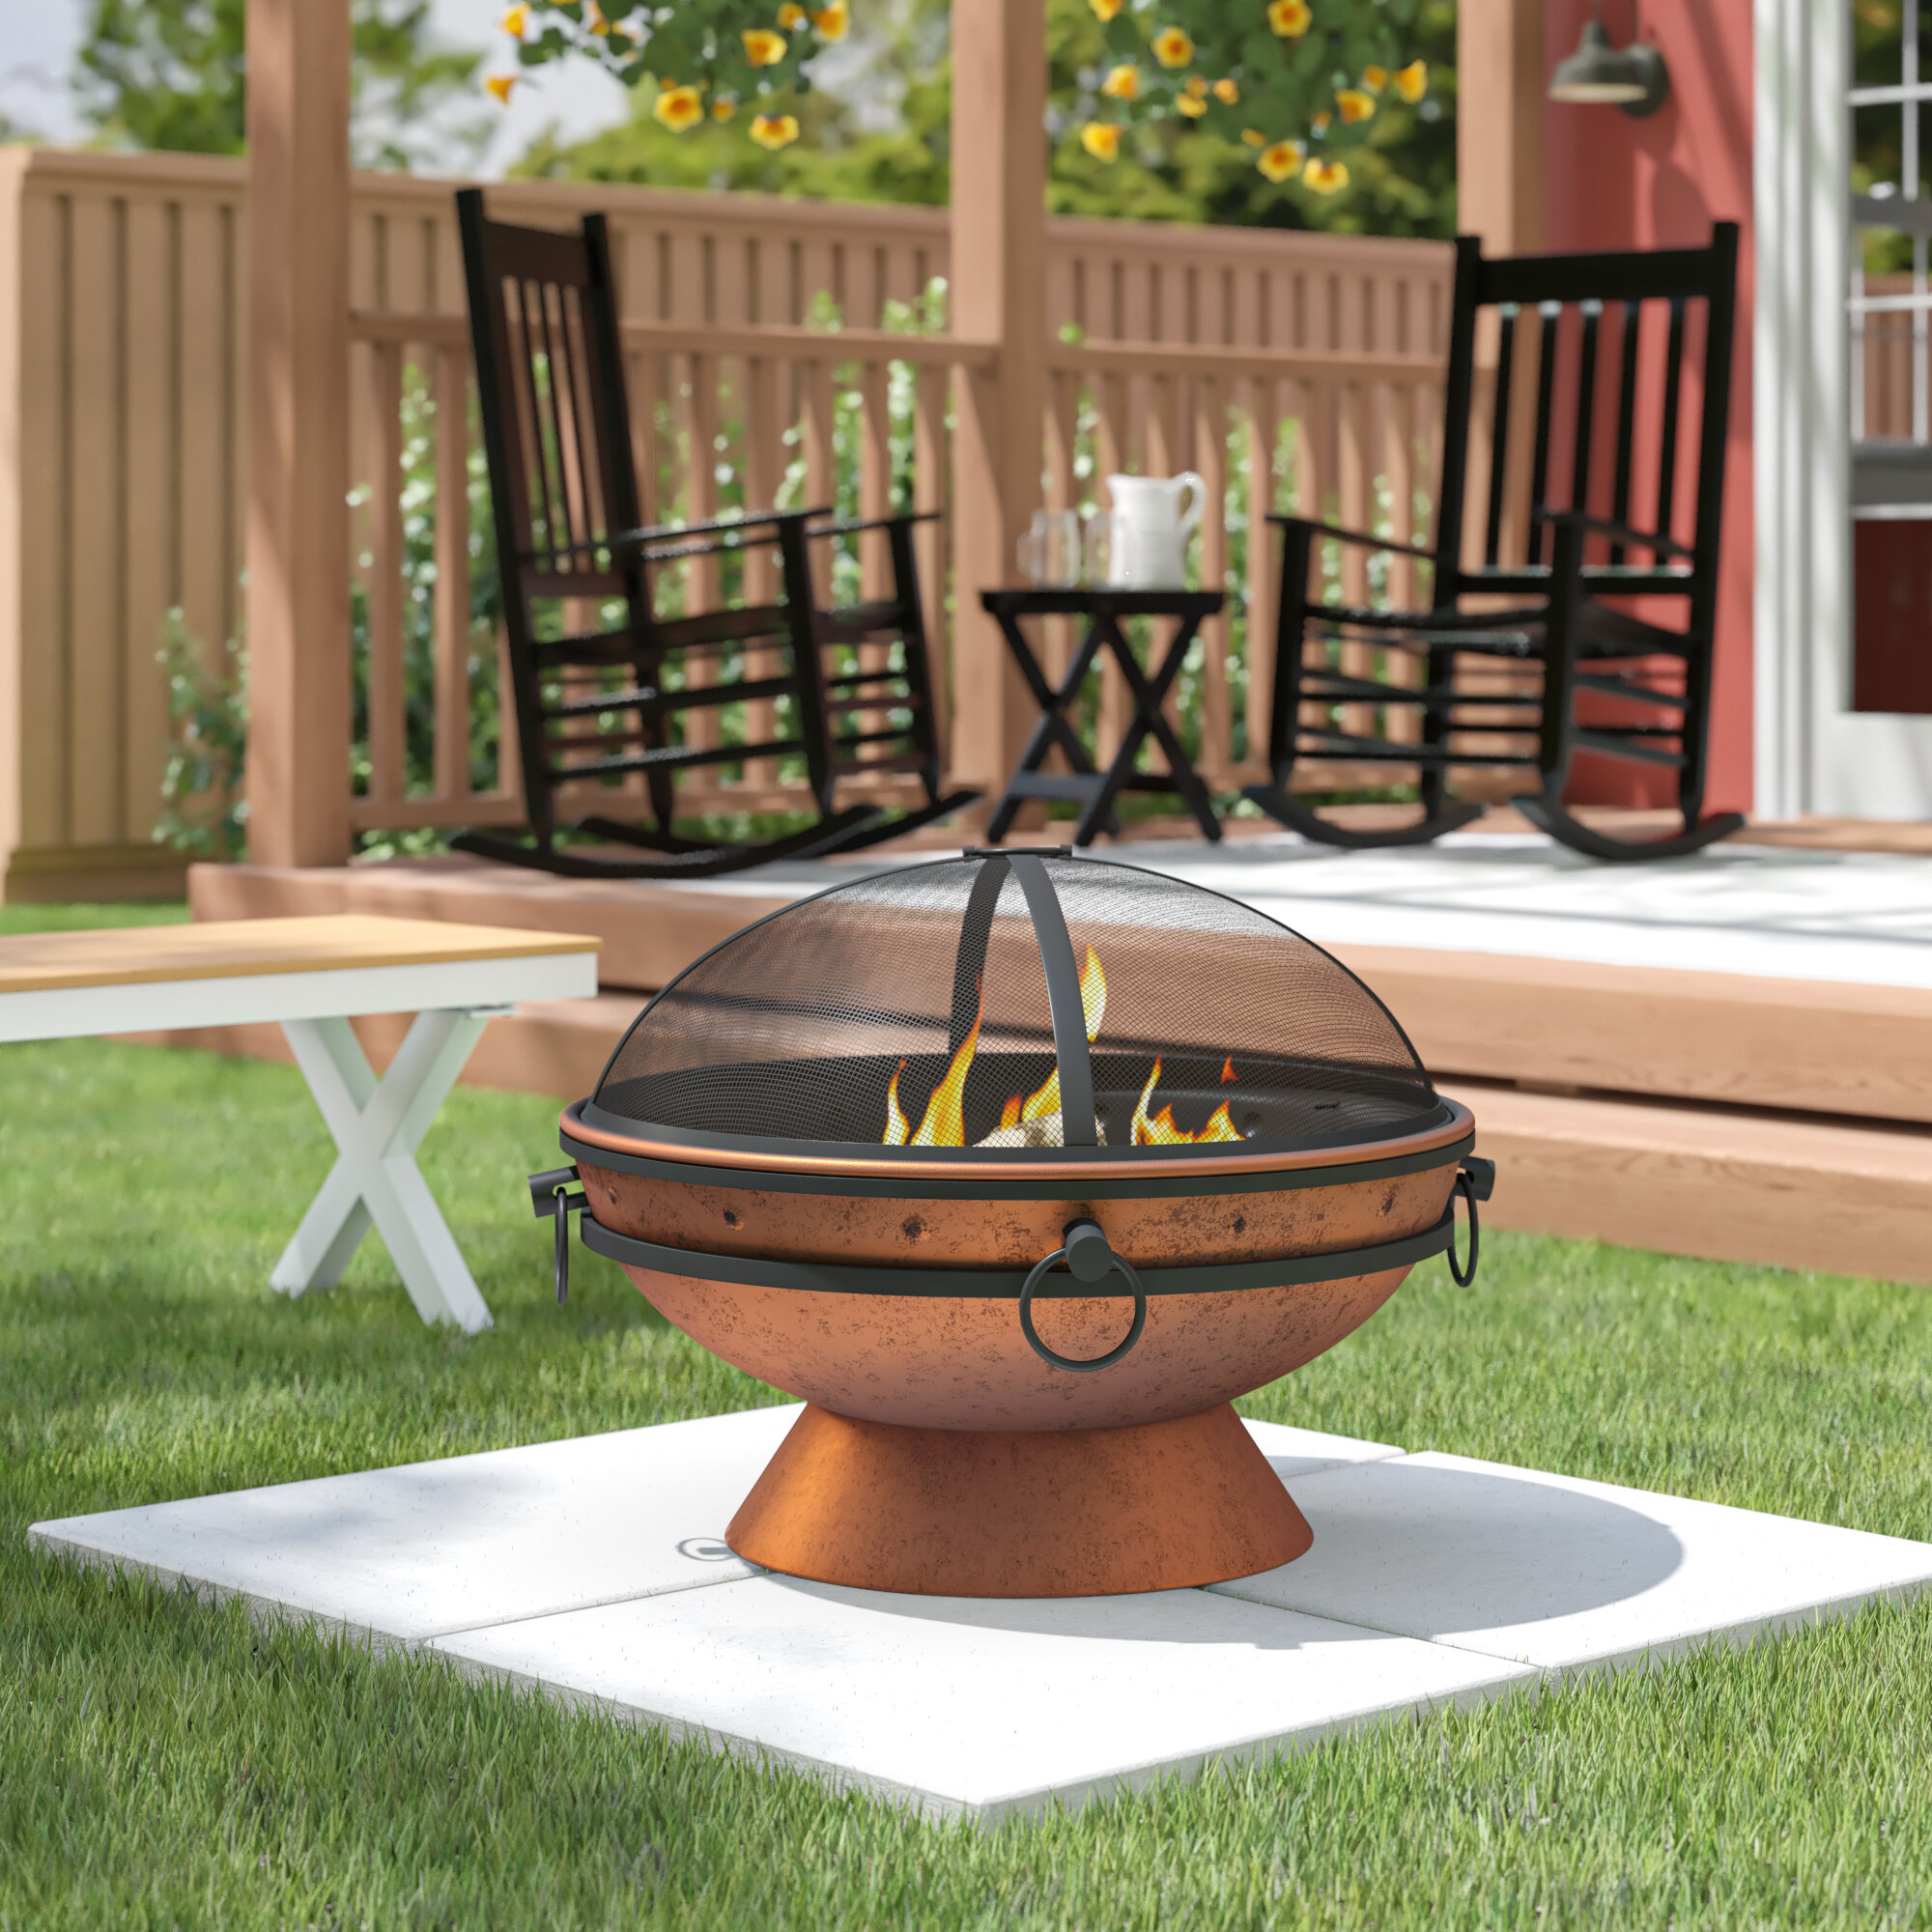 BIG SALE] Best-Selling Fire Pits You'll Love In 2022 | Wayfair